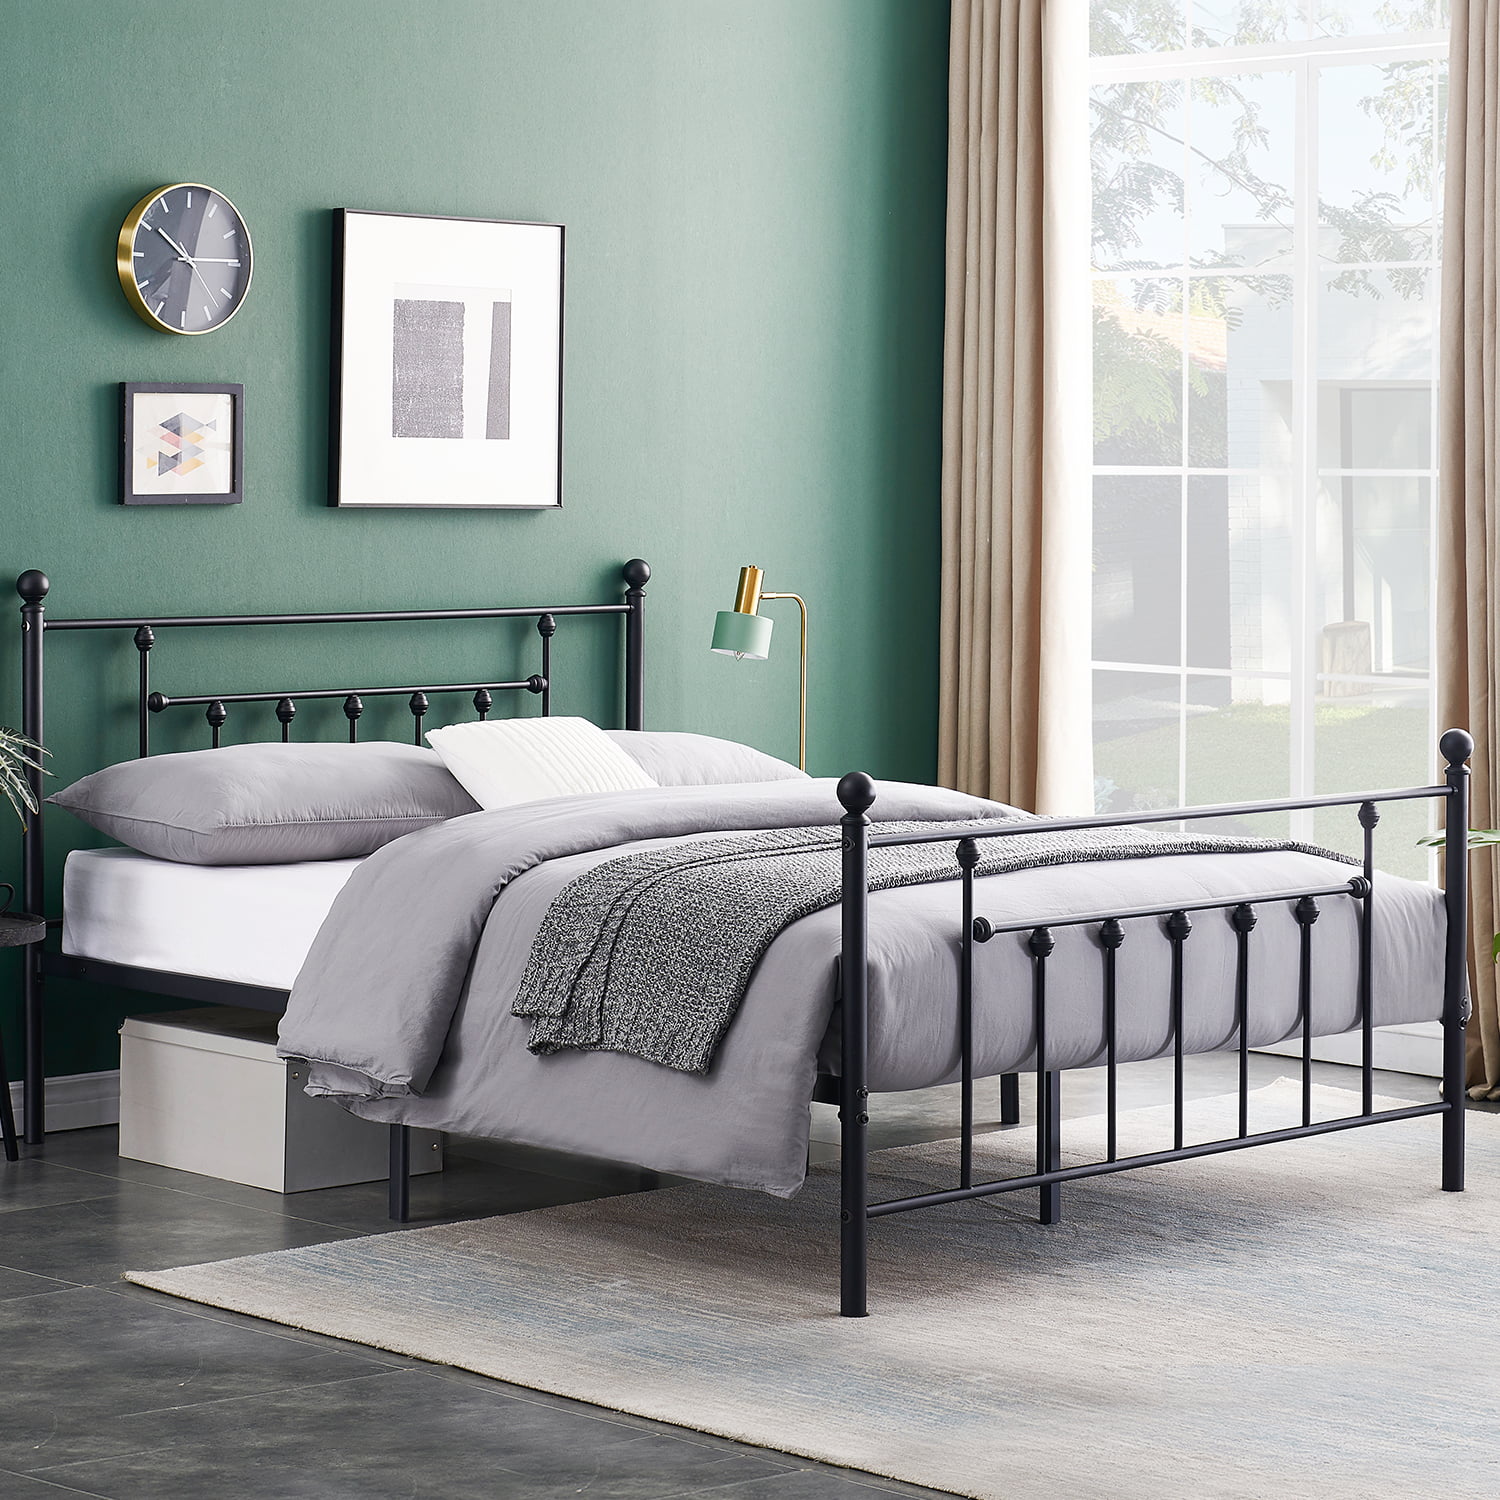 Vecelo Antique Full Size Bed Frame, How To Stop Mattress From Sliding On Metal Bed Frame